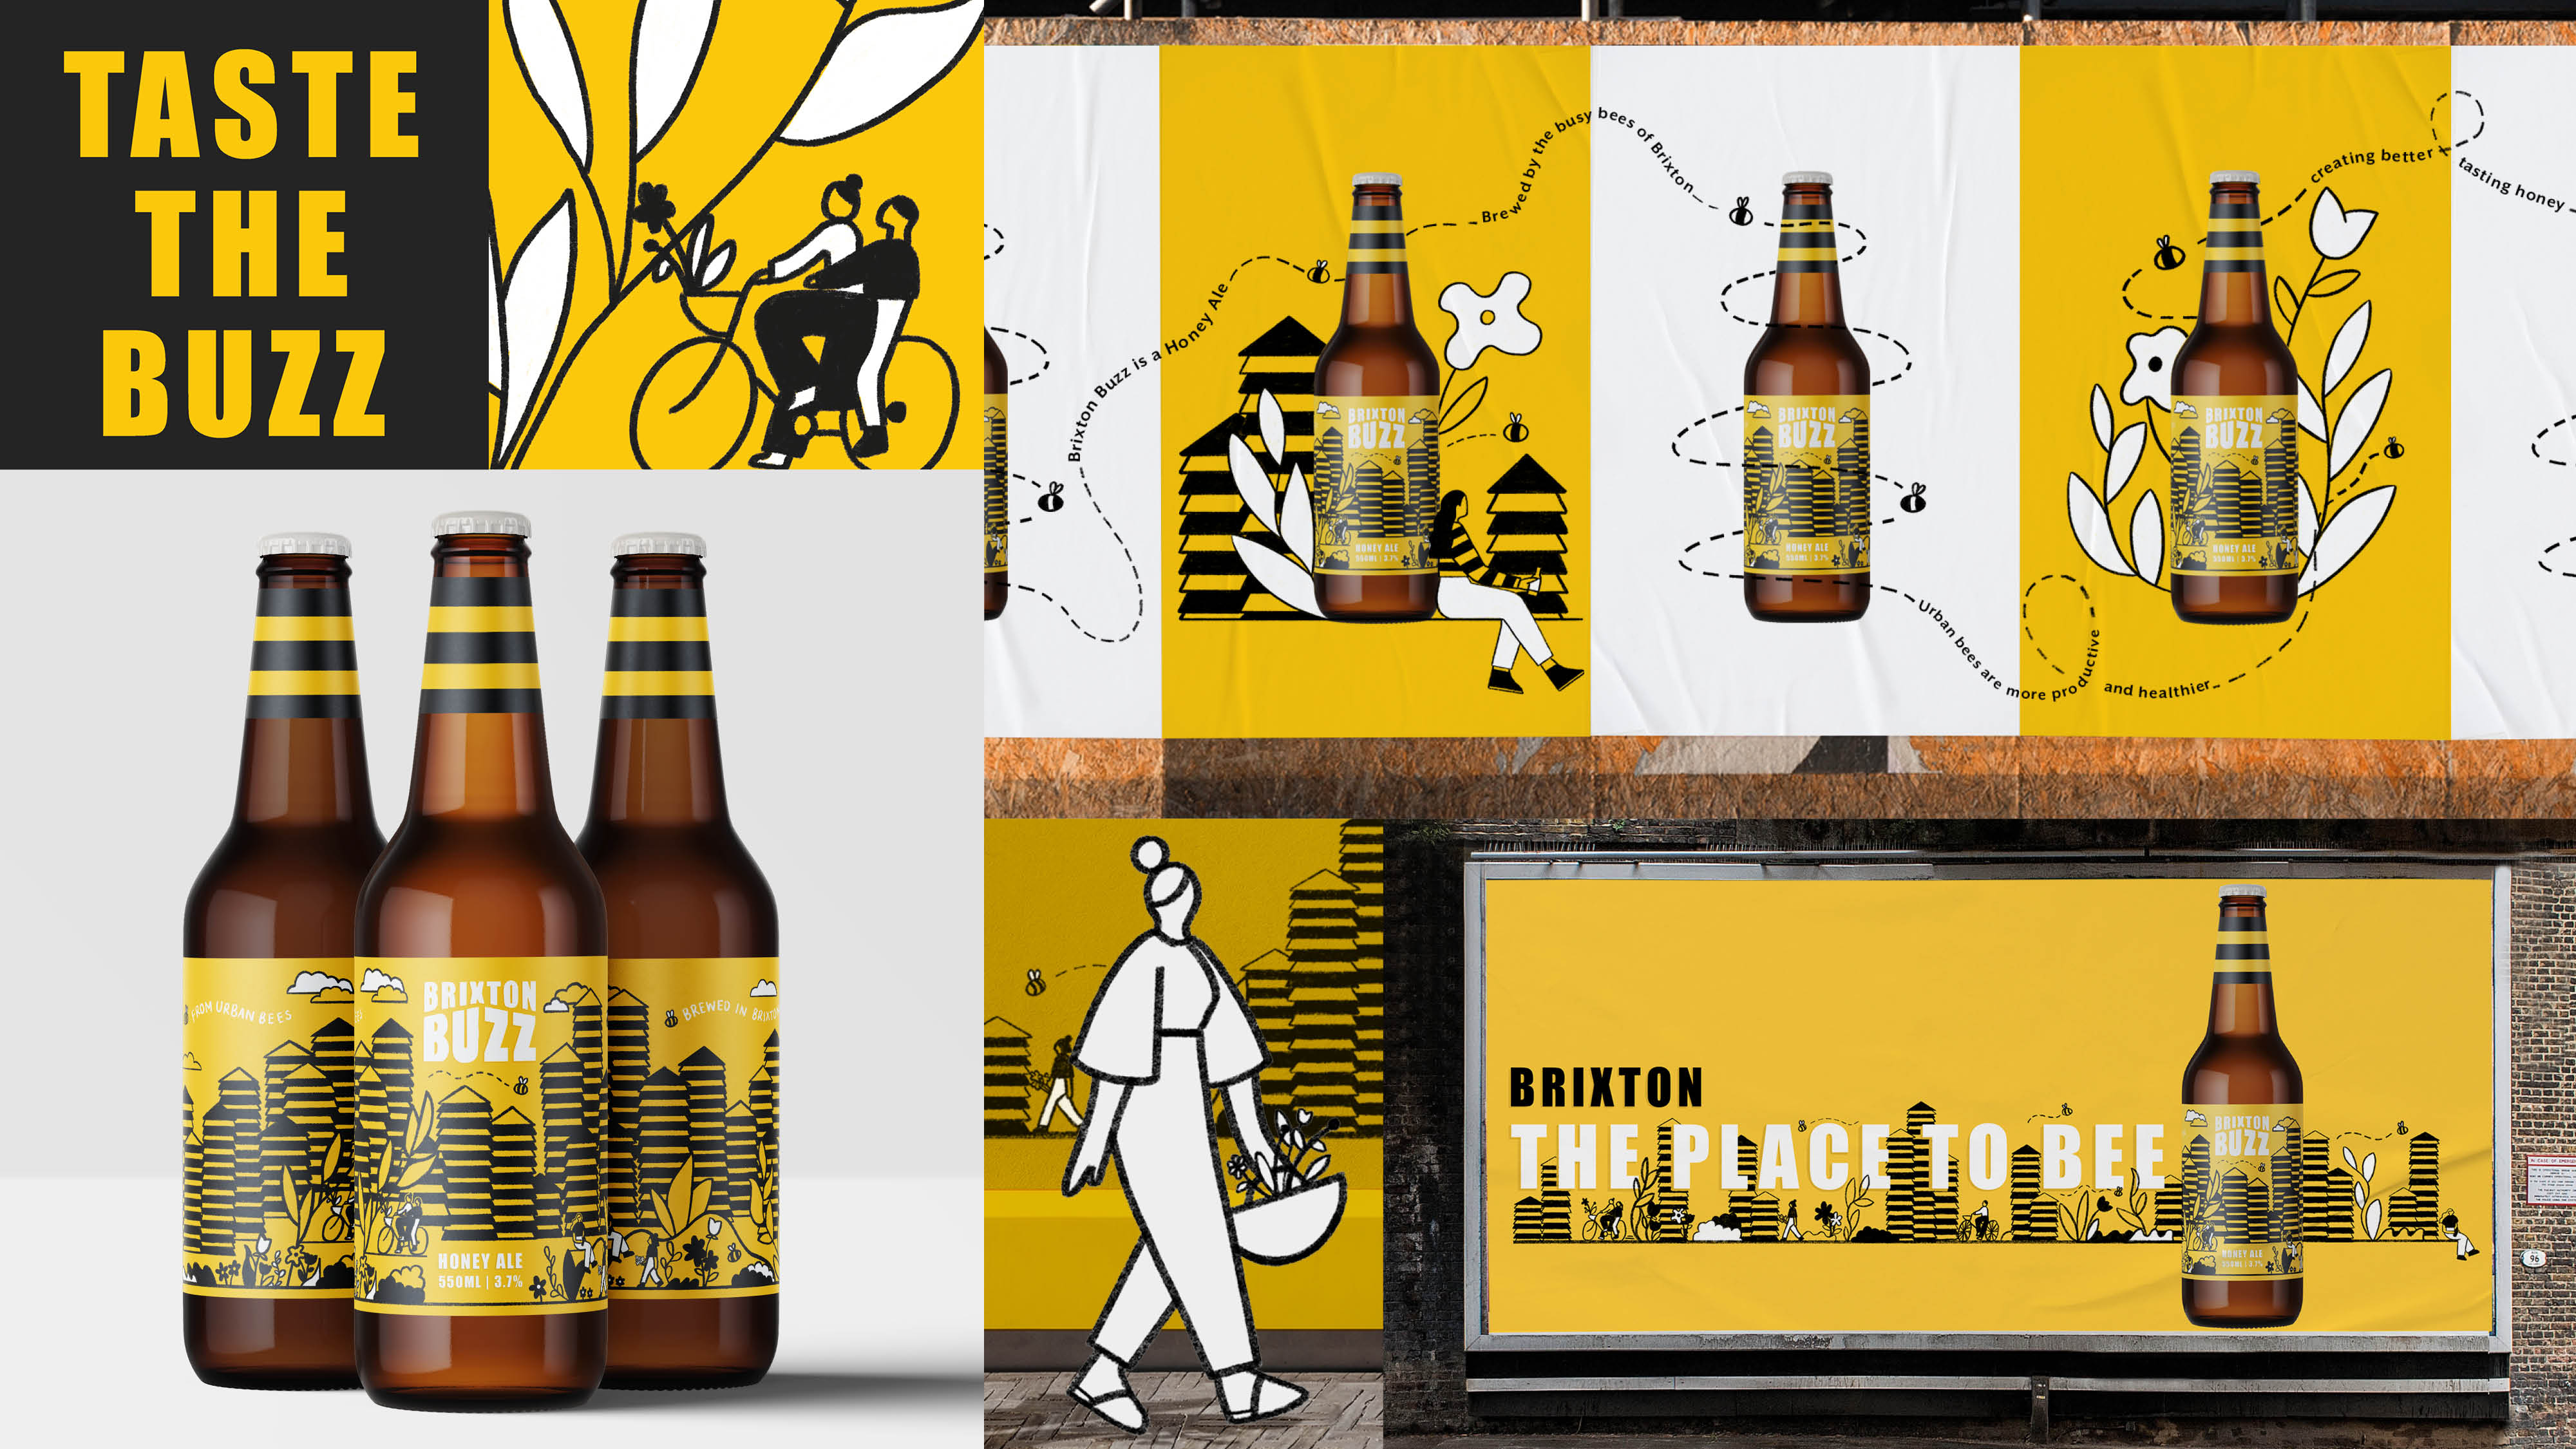 Various photos of the Brixton Buzz brand world, including bottle packaging, illustrations and forms of advertising.